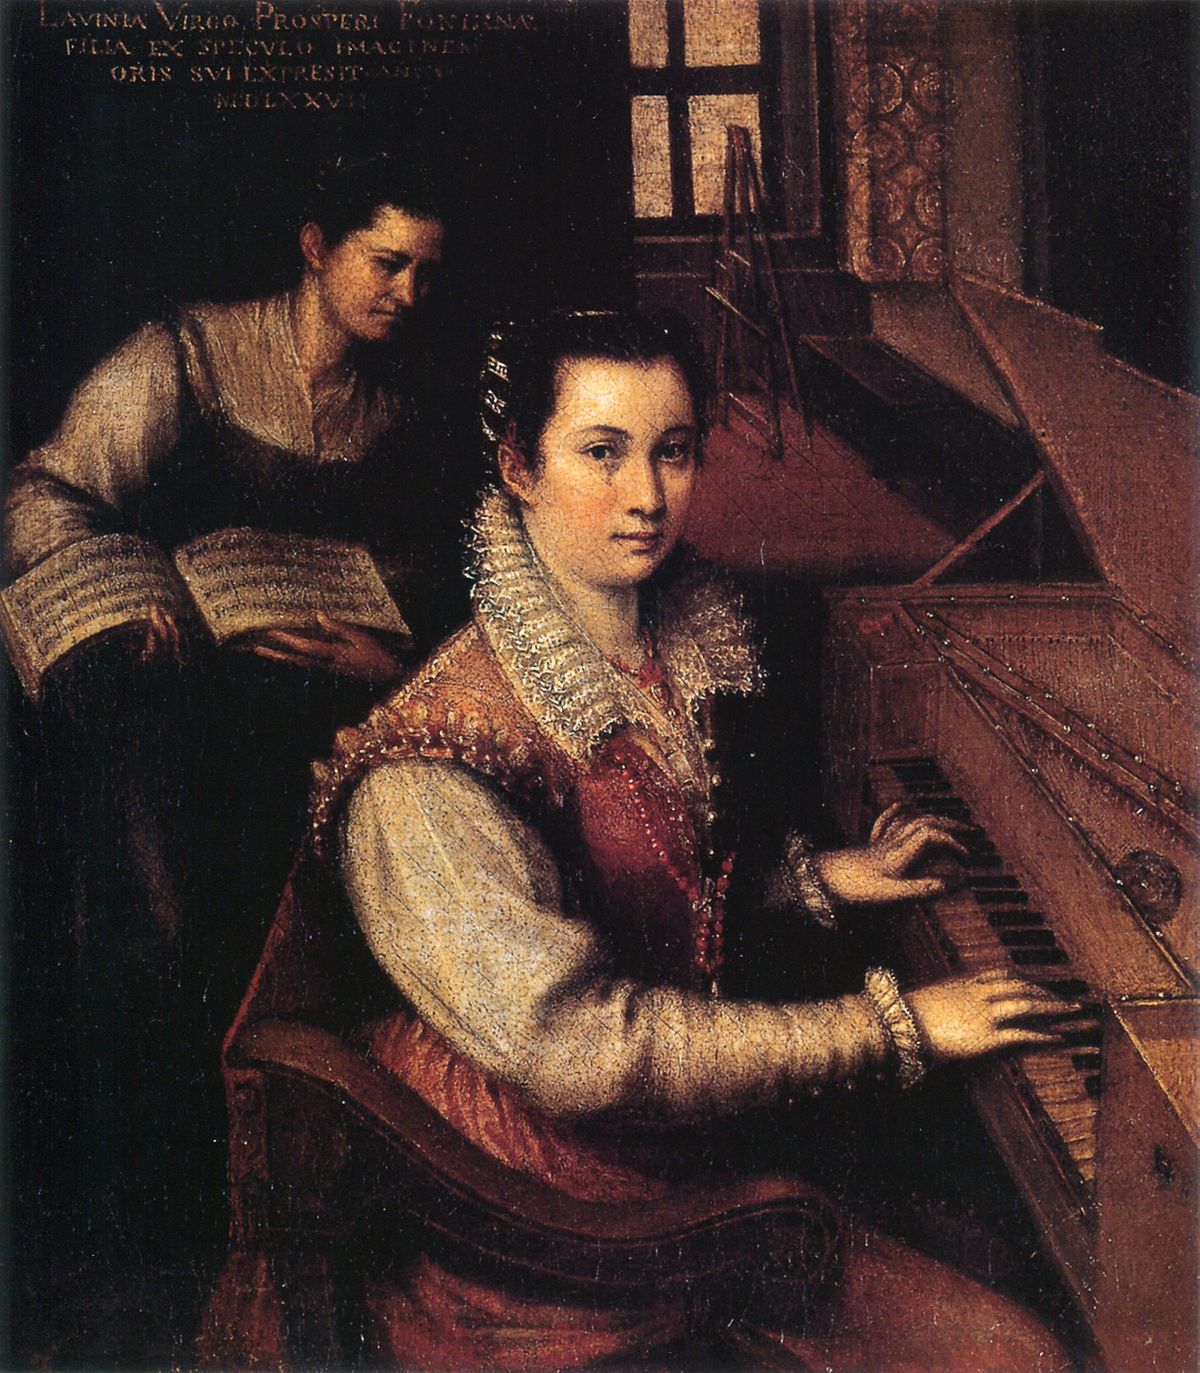 Self-portrait at the Clavichord with a Servant by Lavinia Fontana.jpg